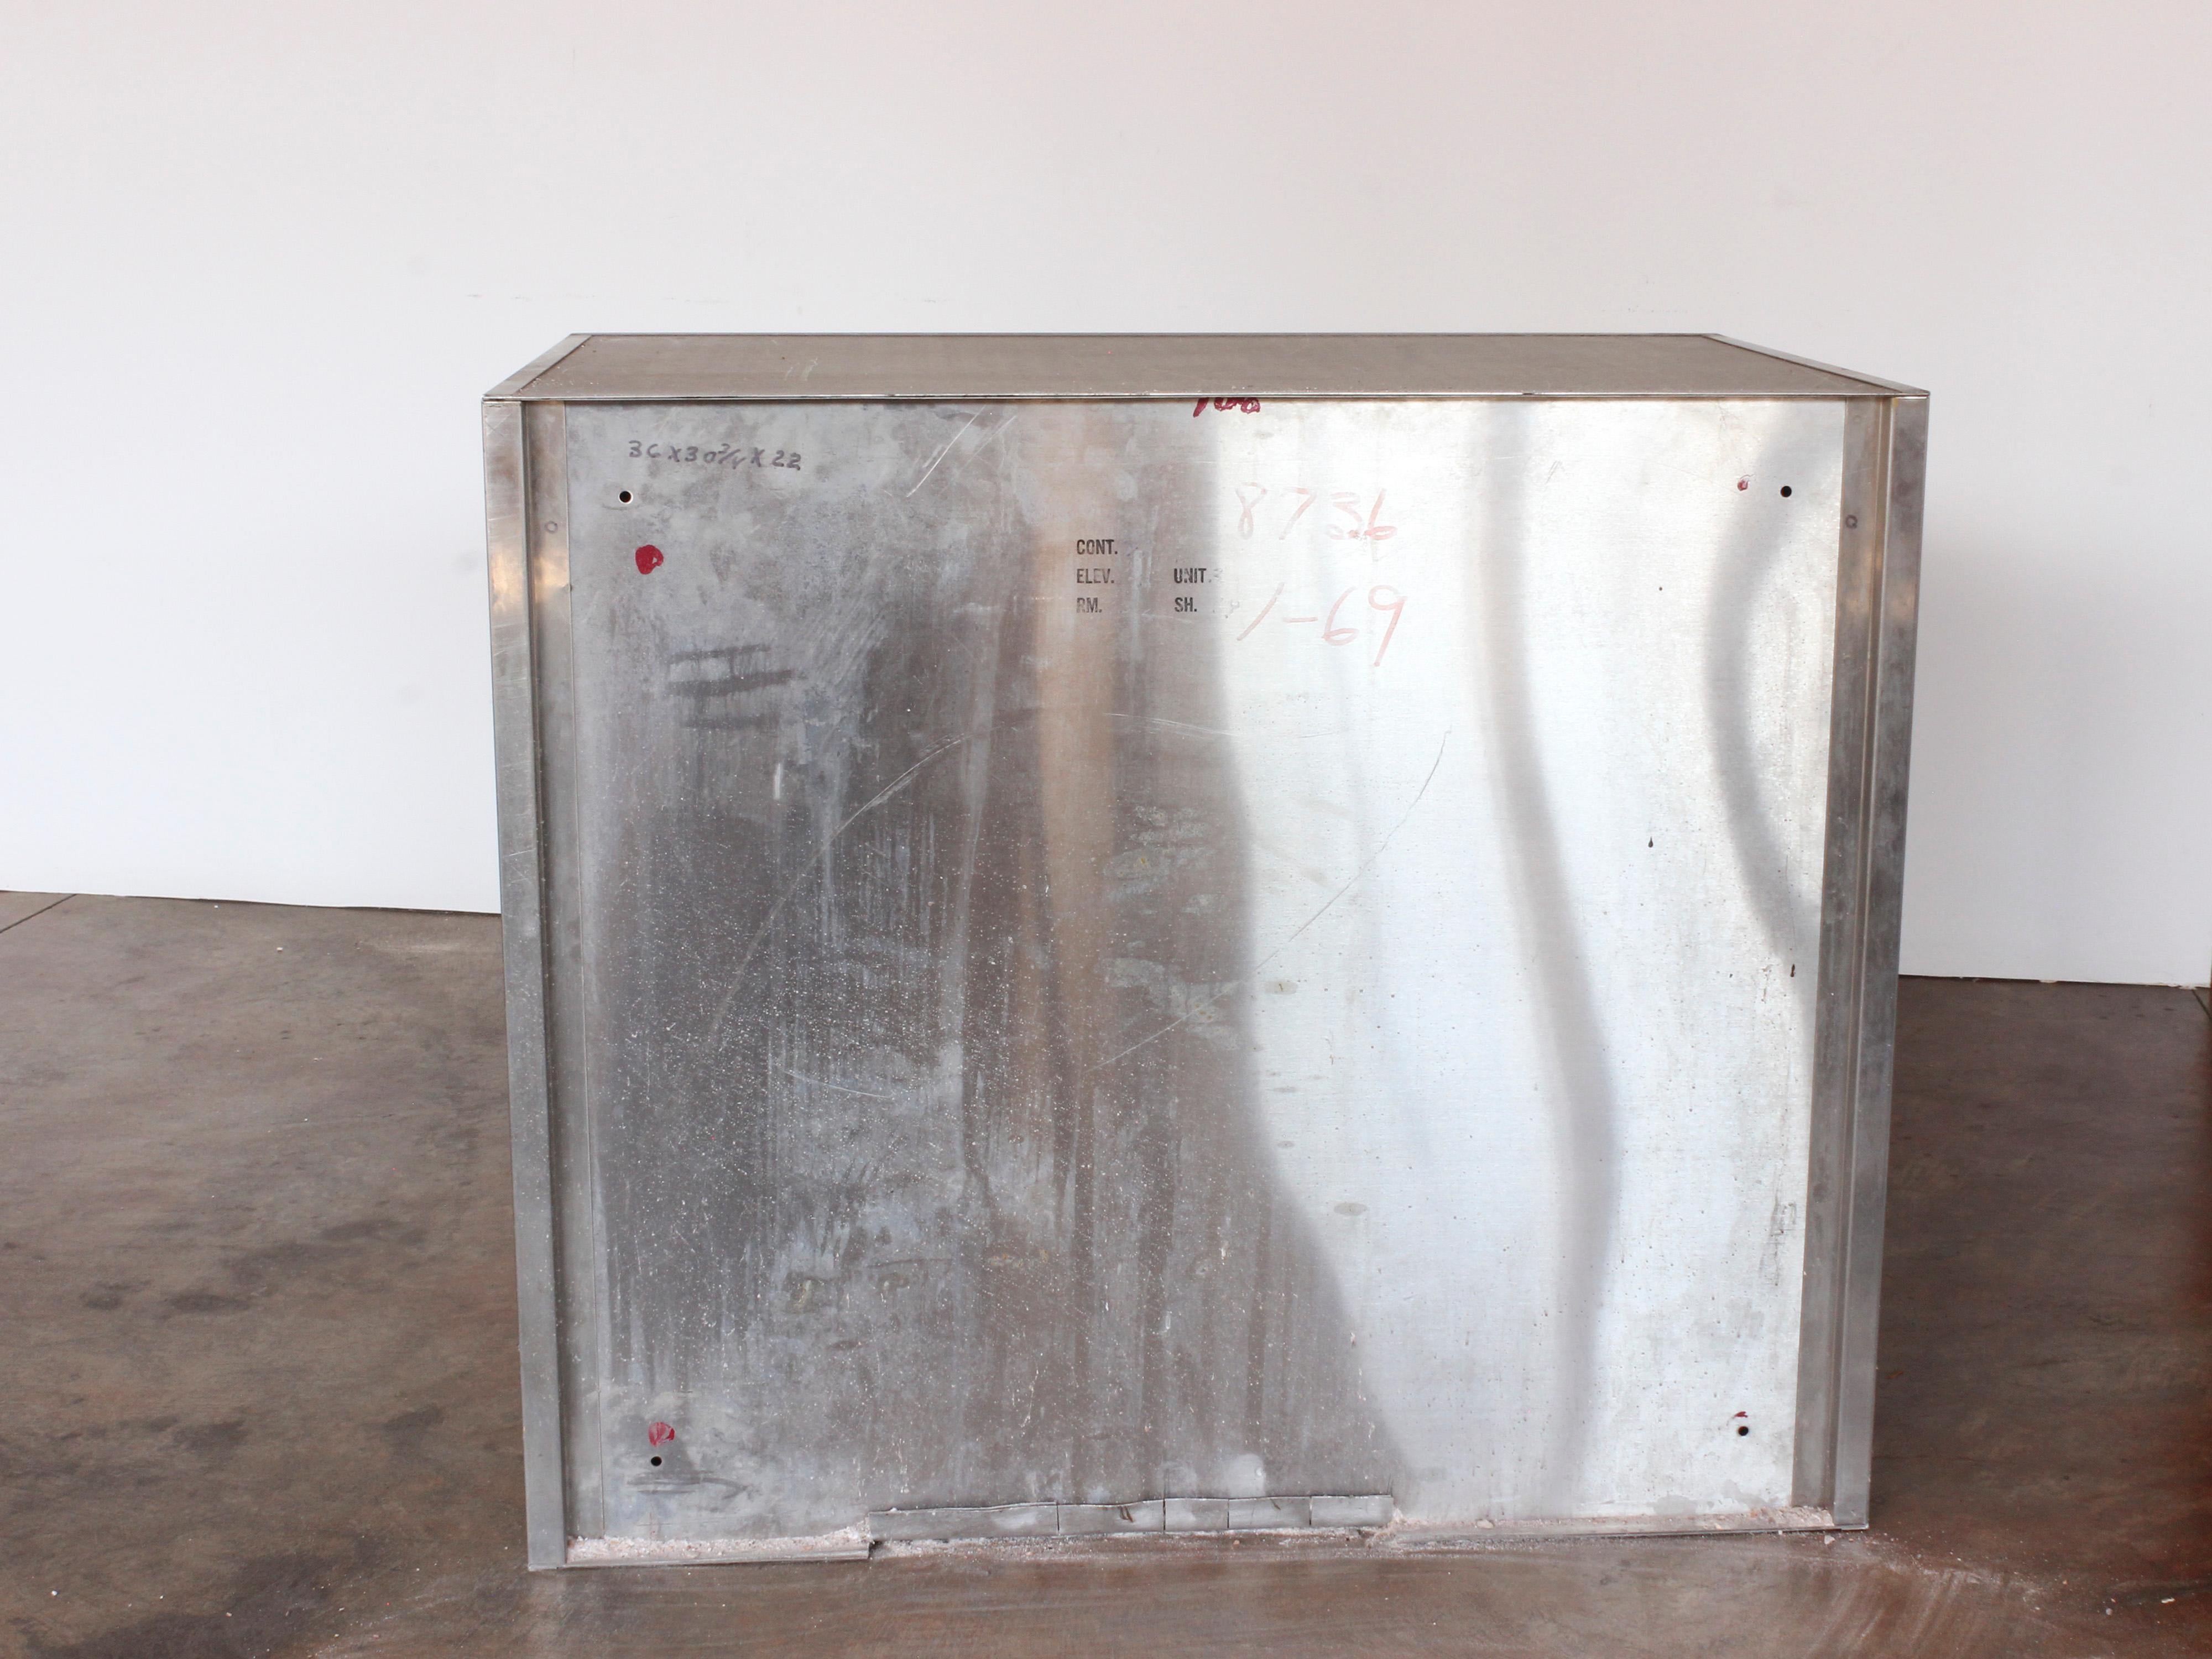 American Industrial Stainless Steel Chest With 4 Drawers, C. 1940s For Sale 12